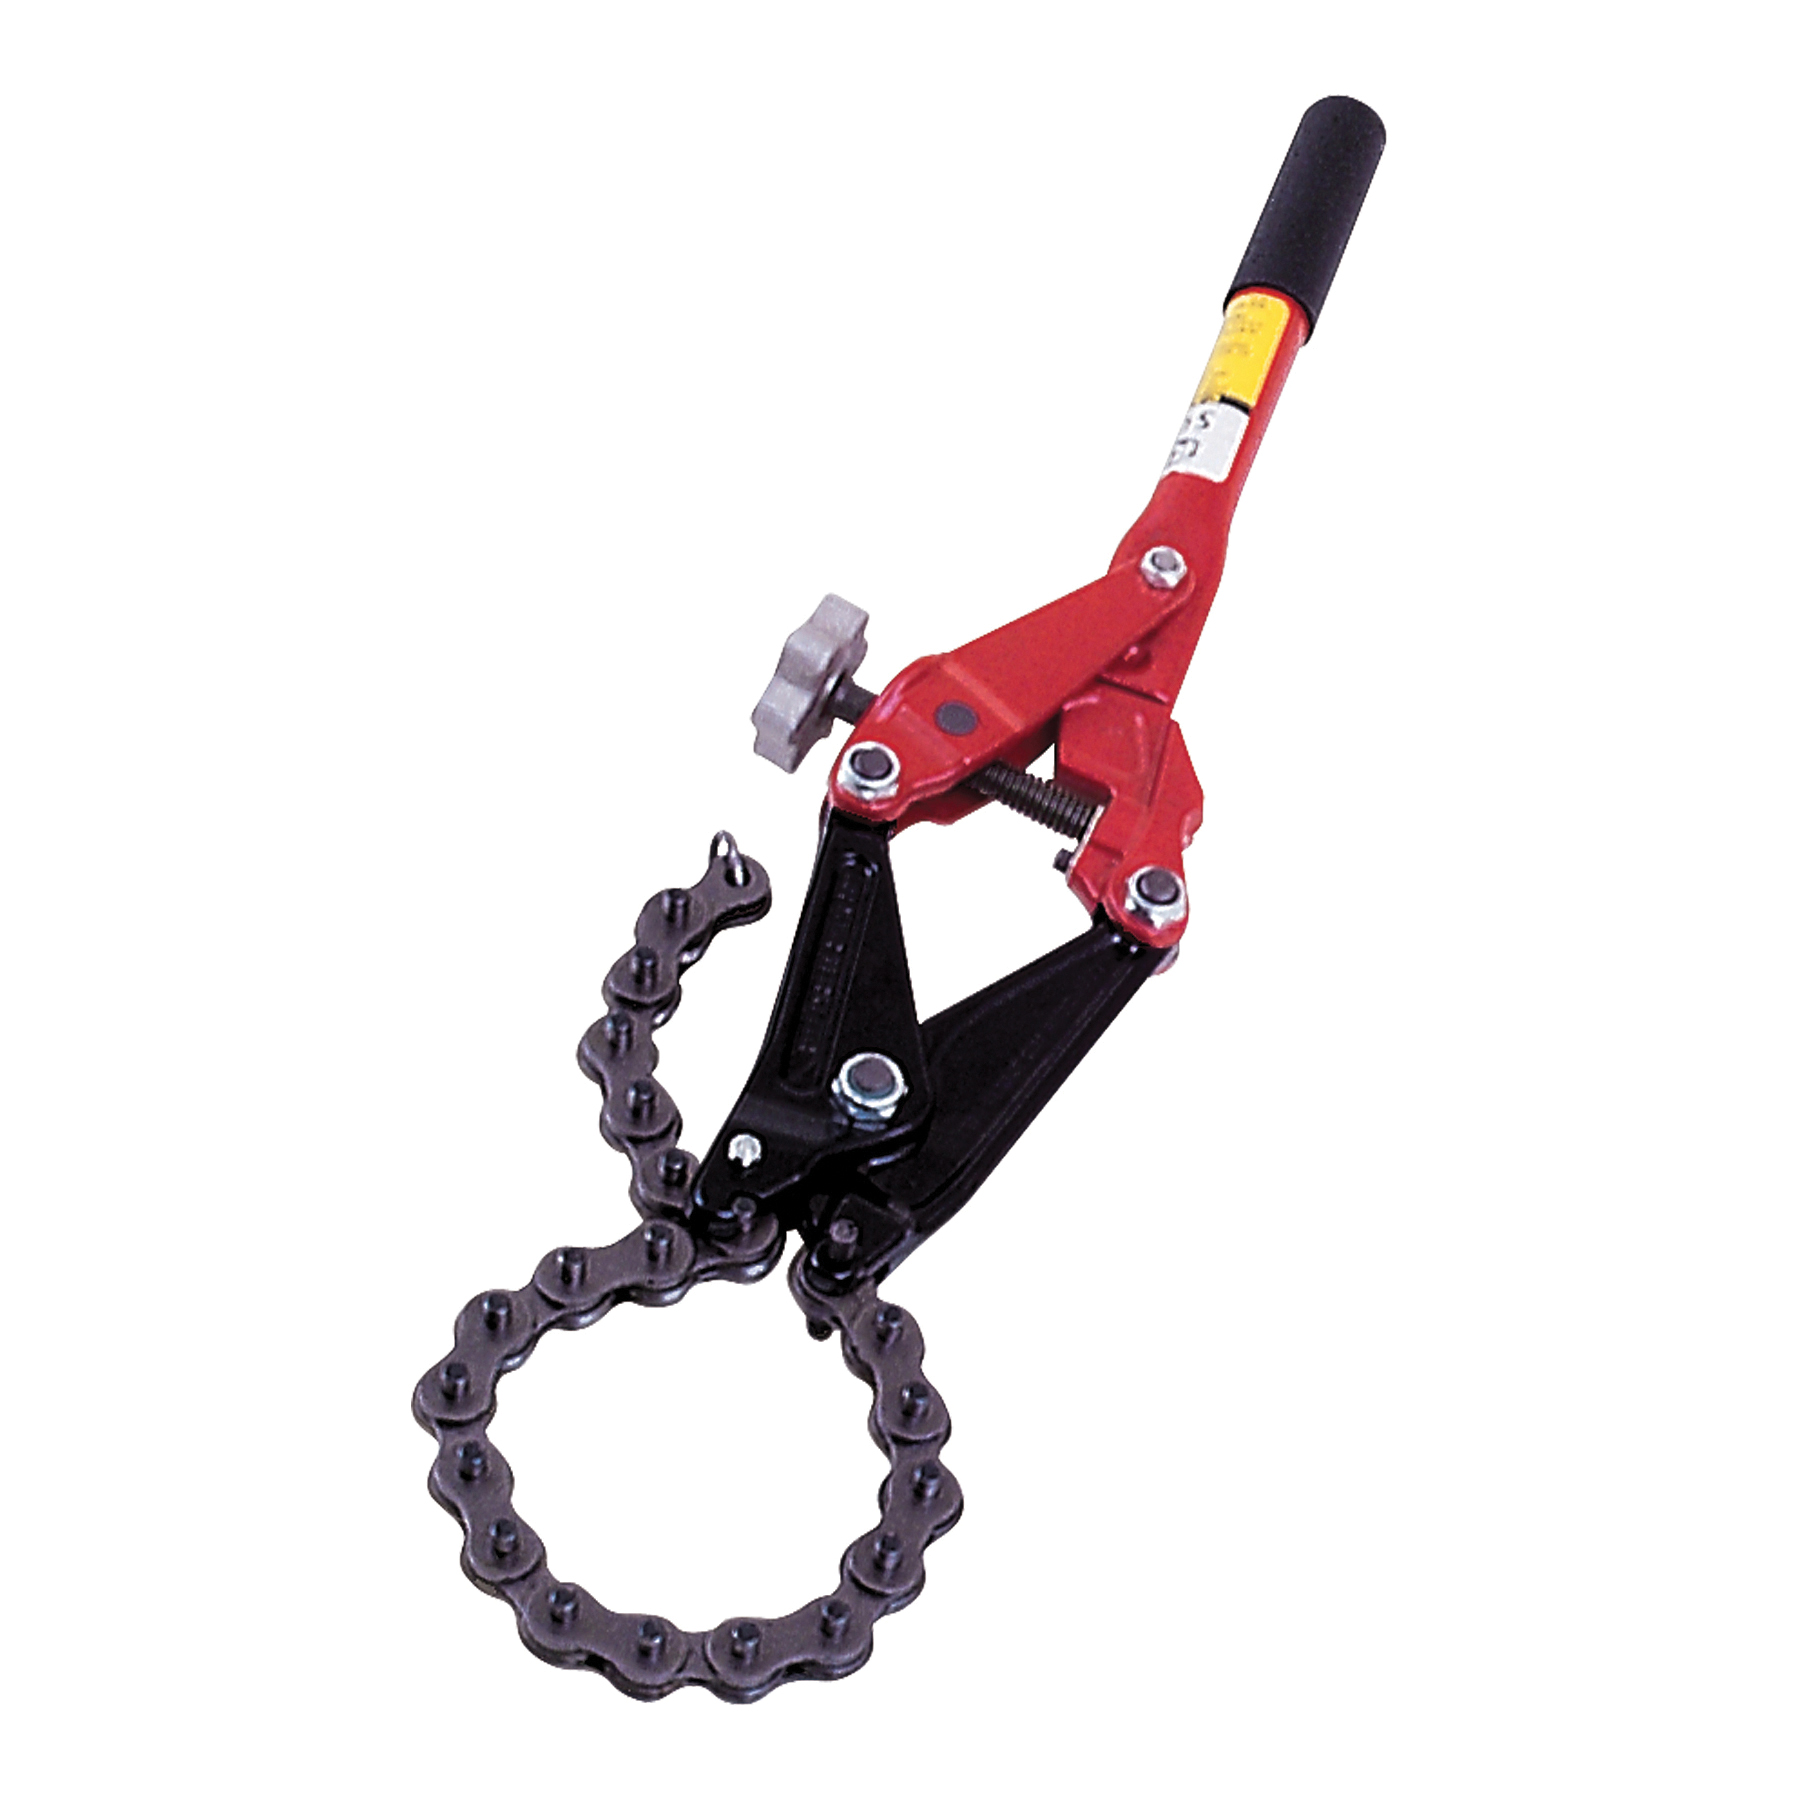 Reed 08049 Ratchet Soil Pipe Cutter, 1-1/2 to 6 in